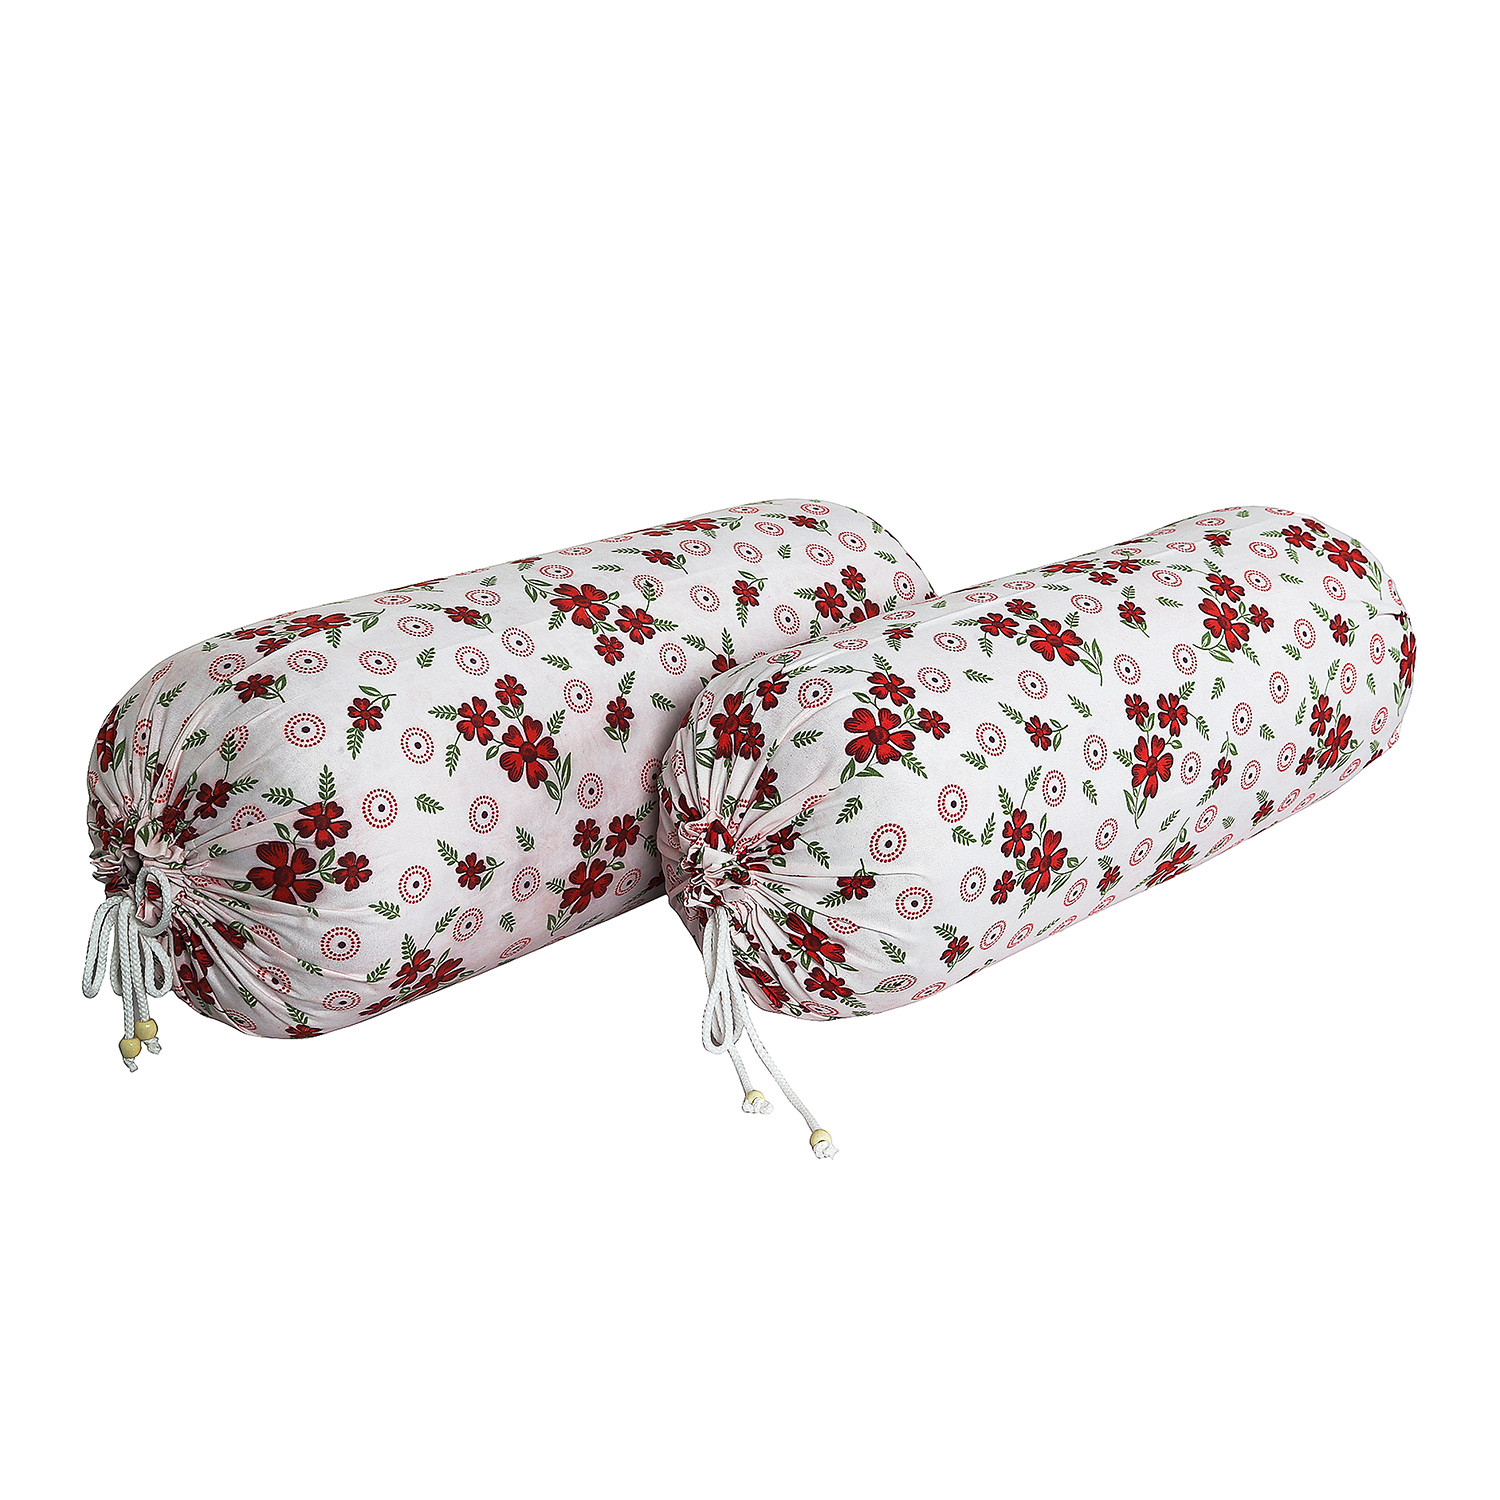 Kuber Industries Bolster Covers | Soft Cotton Bolster Cover Set | Diwan Round Bolster Pillow Covers |  Maroon Flower Print Roll Masand Cover | 16x32 Inch |Pink